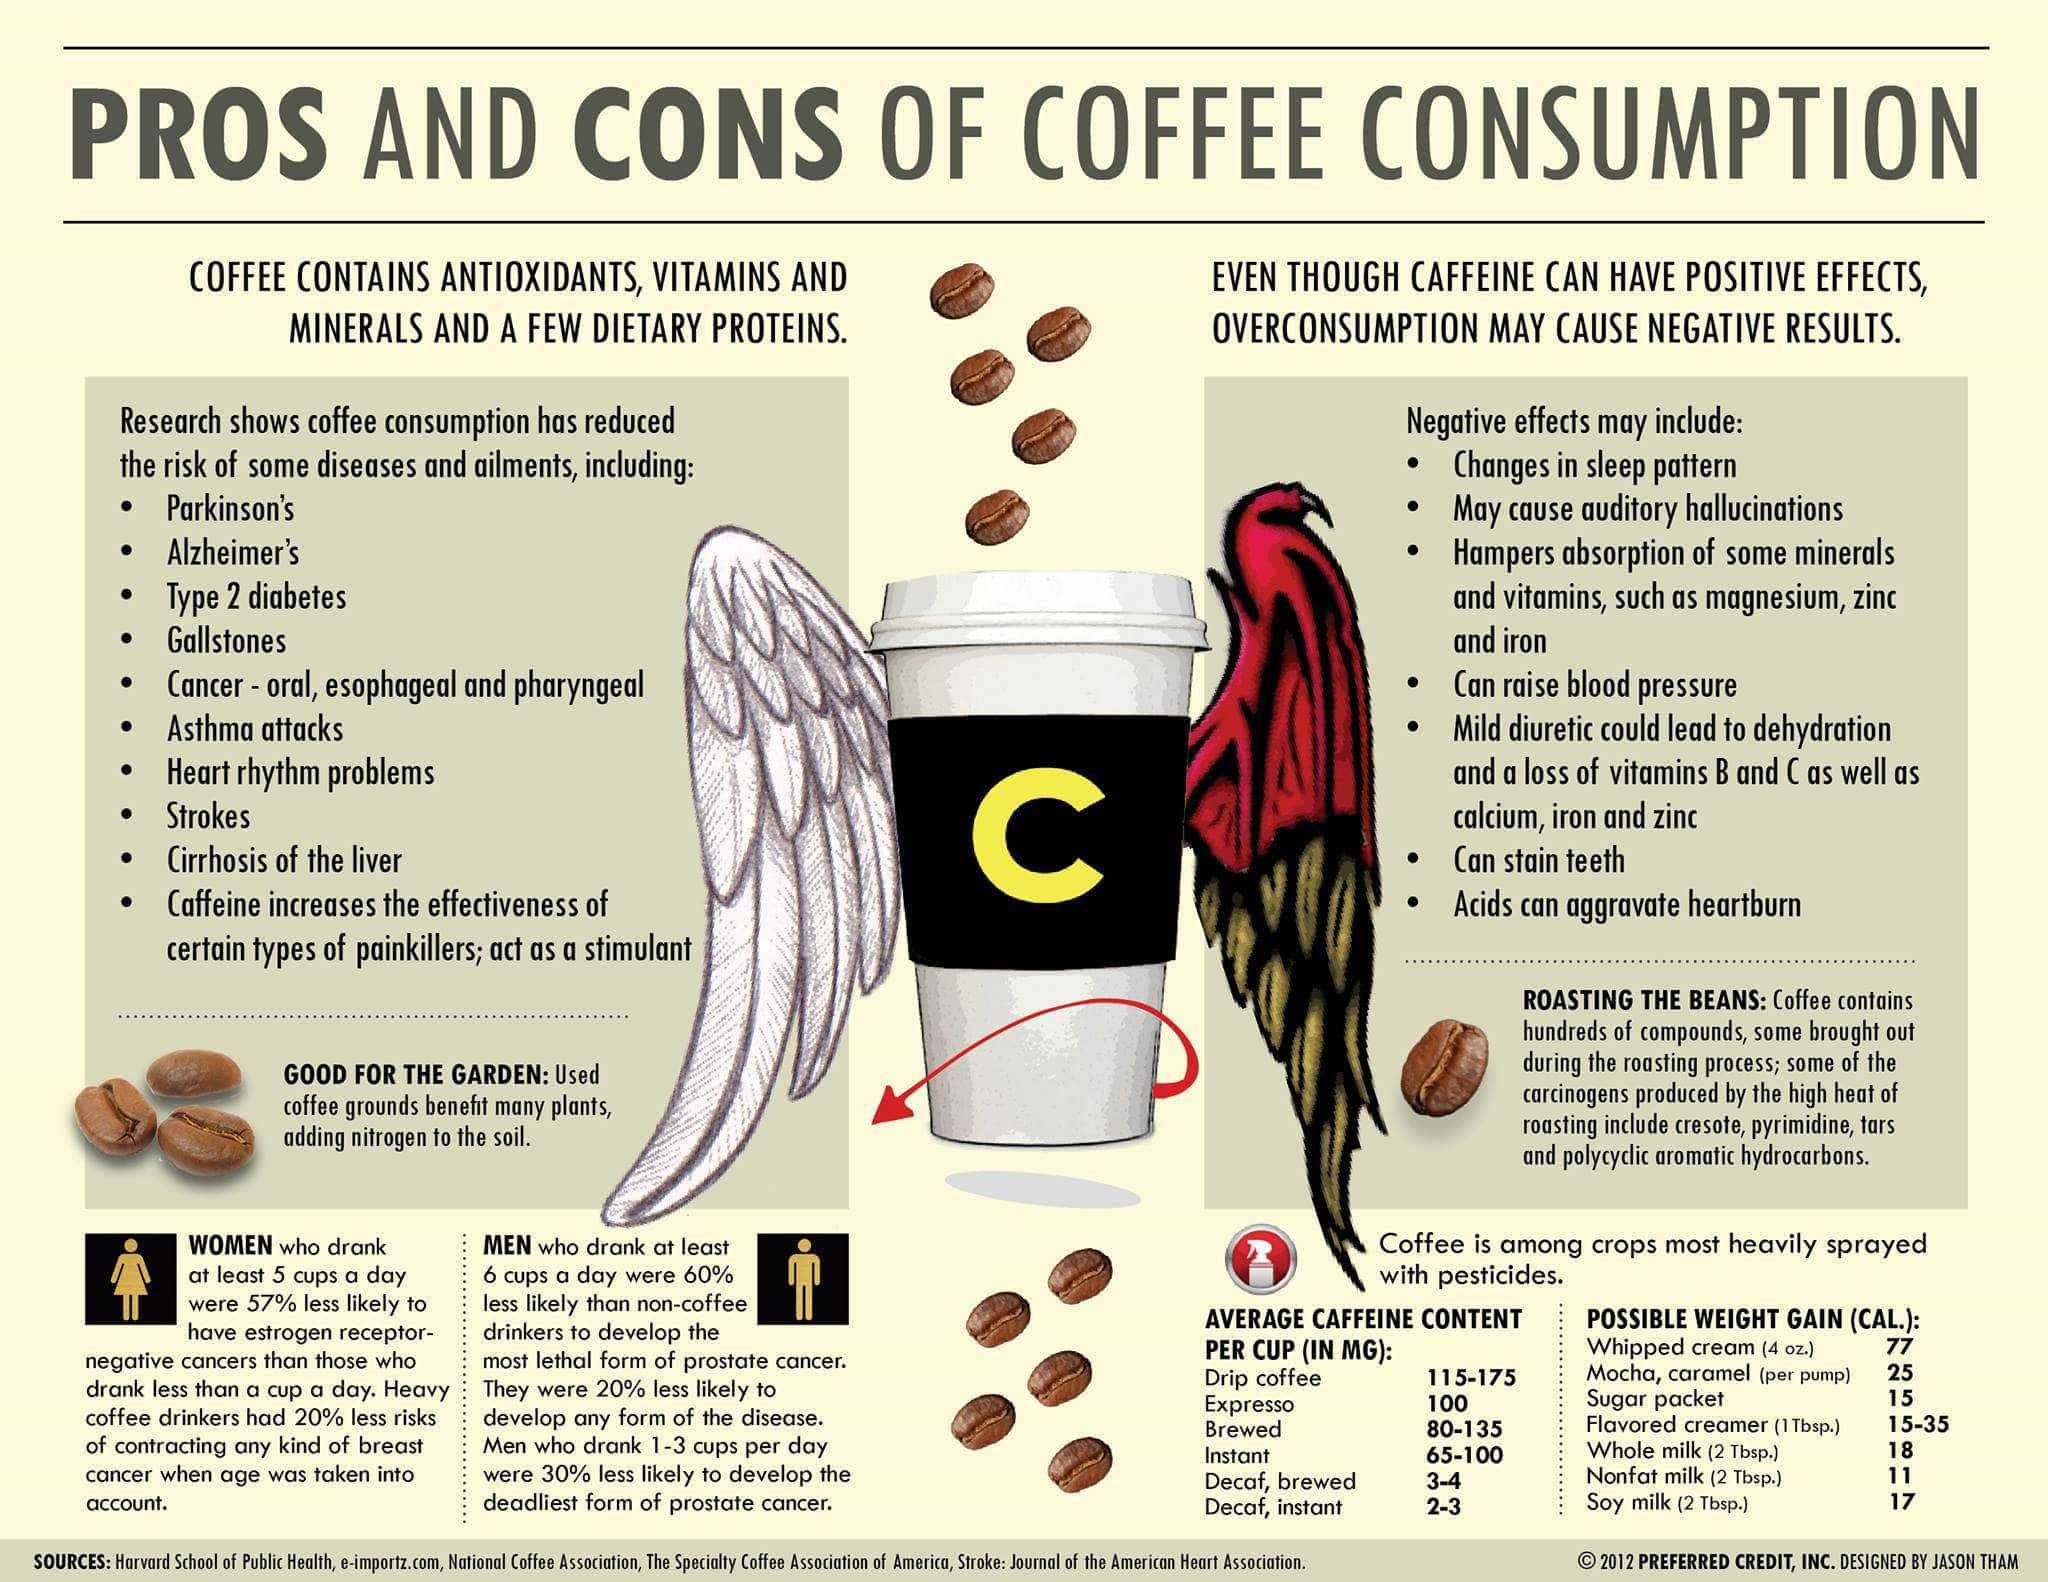 Are you a coffee lover? Here are some fun coffee facts for you to check out! #coffeelovers ...